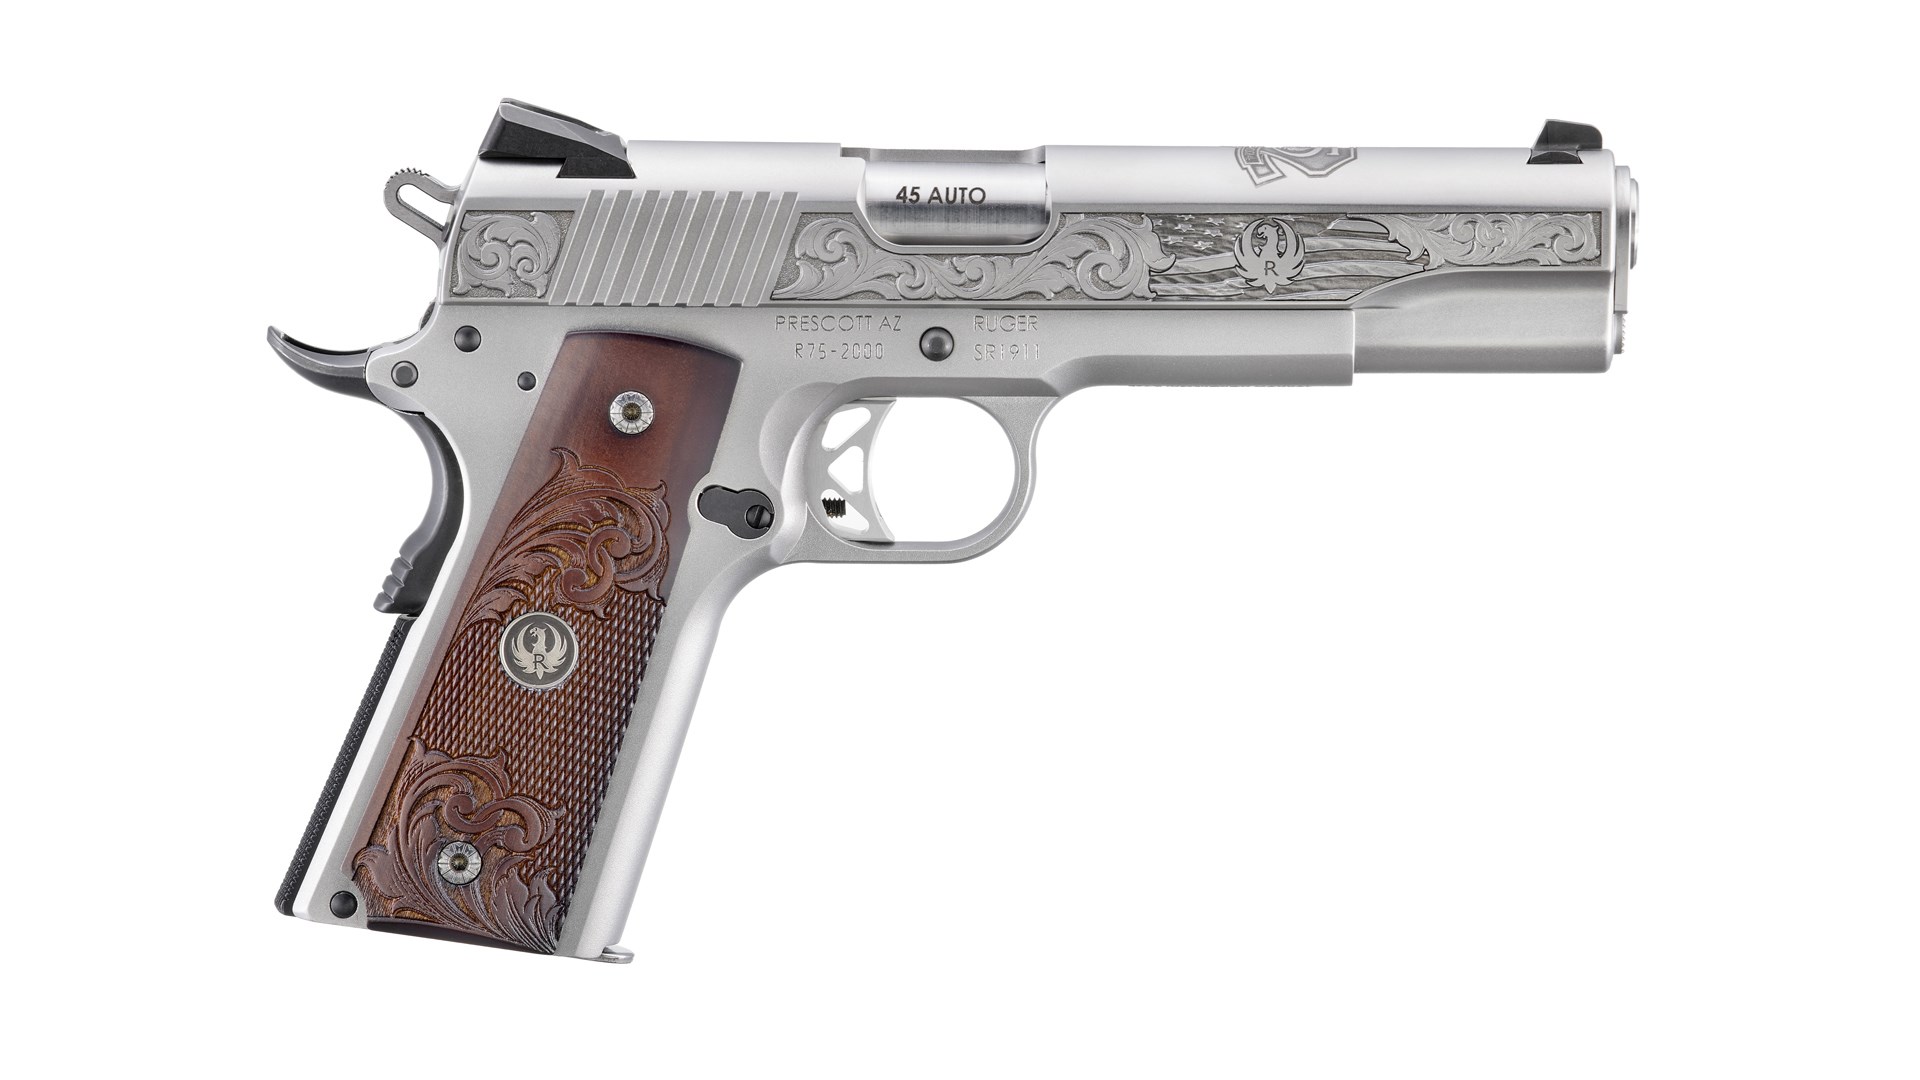 Right side of the Ruger Diamond Anniversary SR1911.